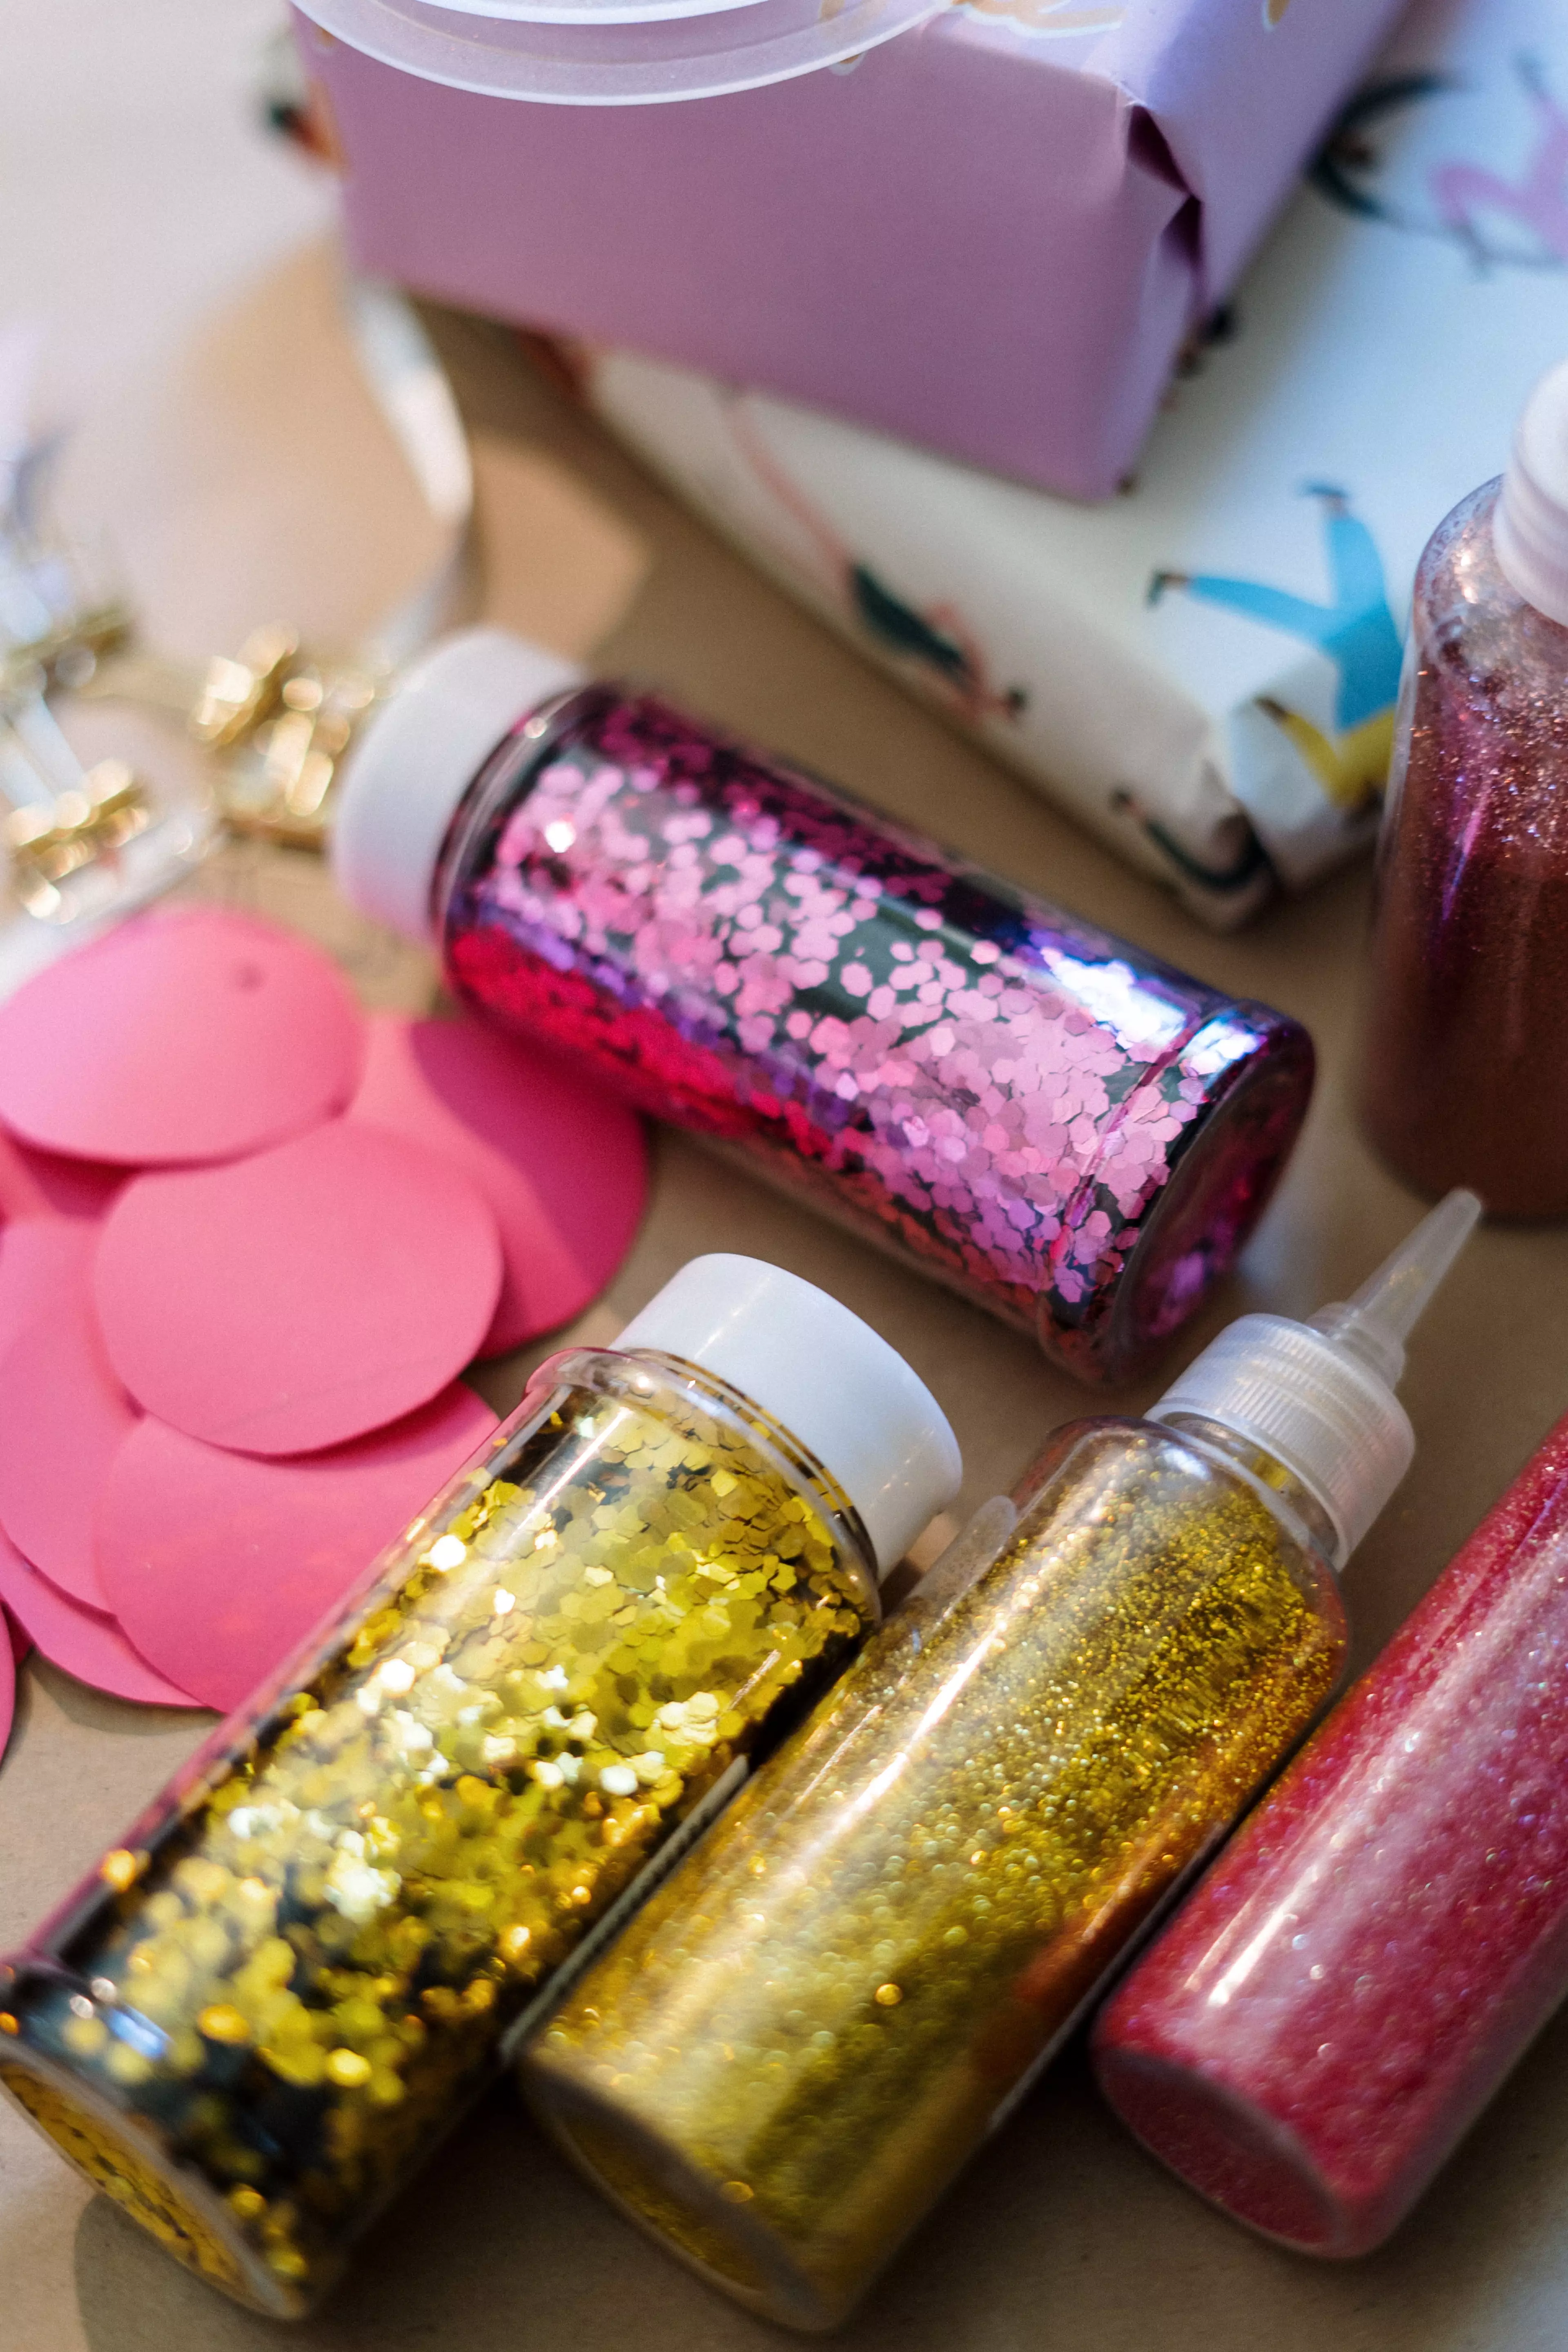 Many supermarkets are pledging to cut out plastics and glitter (